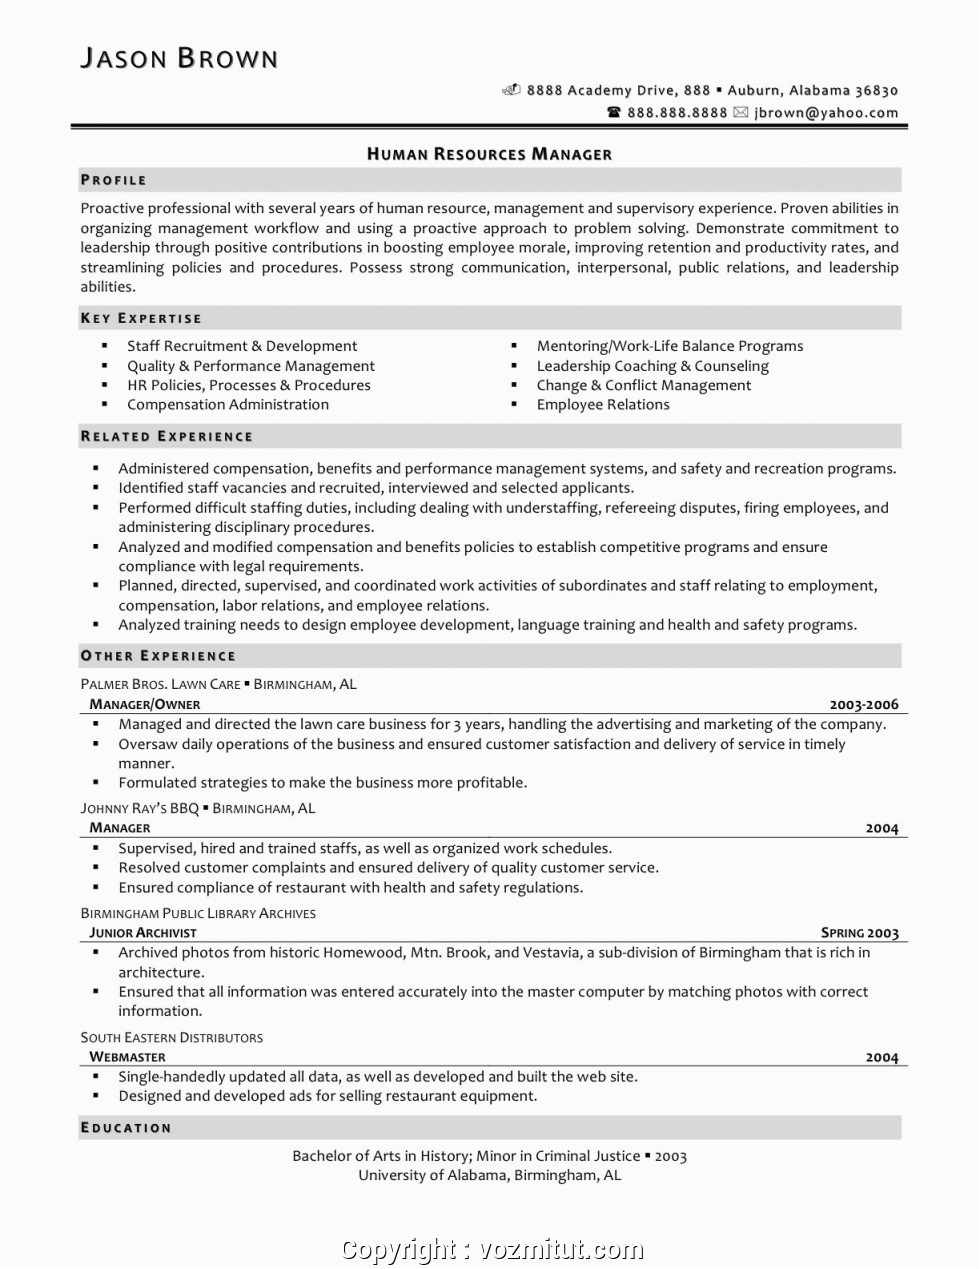 Hr Executive Resume Sample In India Print Resume Manager Human Resources Hr Director Resume